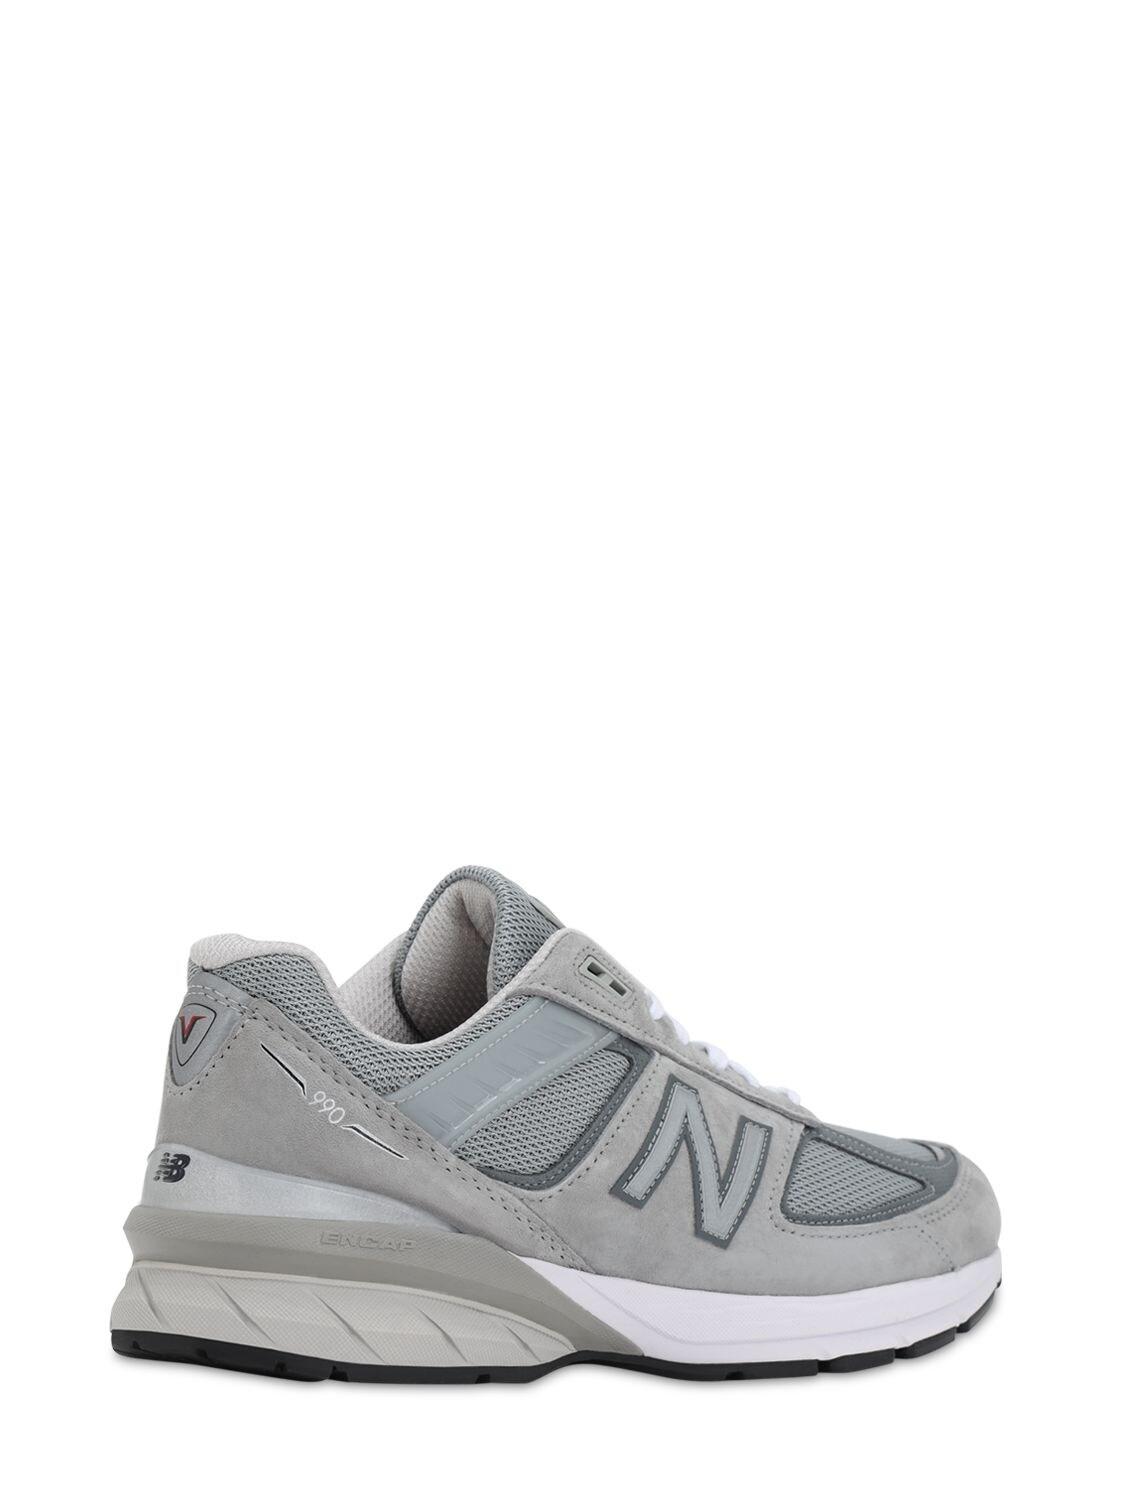 New Balance 990 V5 Suede & Mesh Sneakers in Grey (Gray) for Men - Lyst